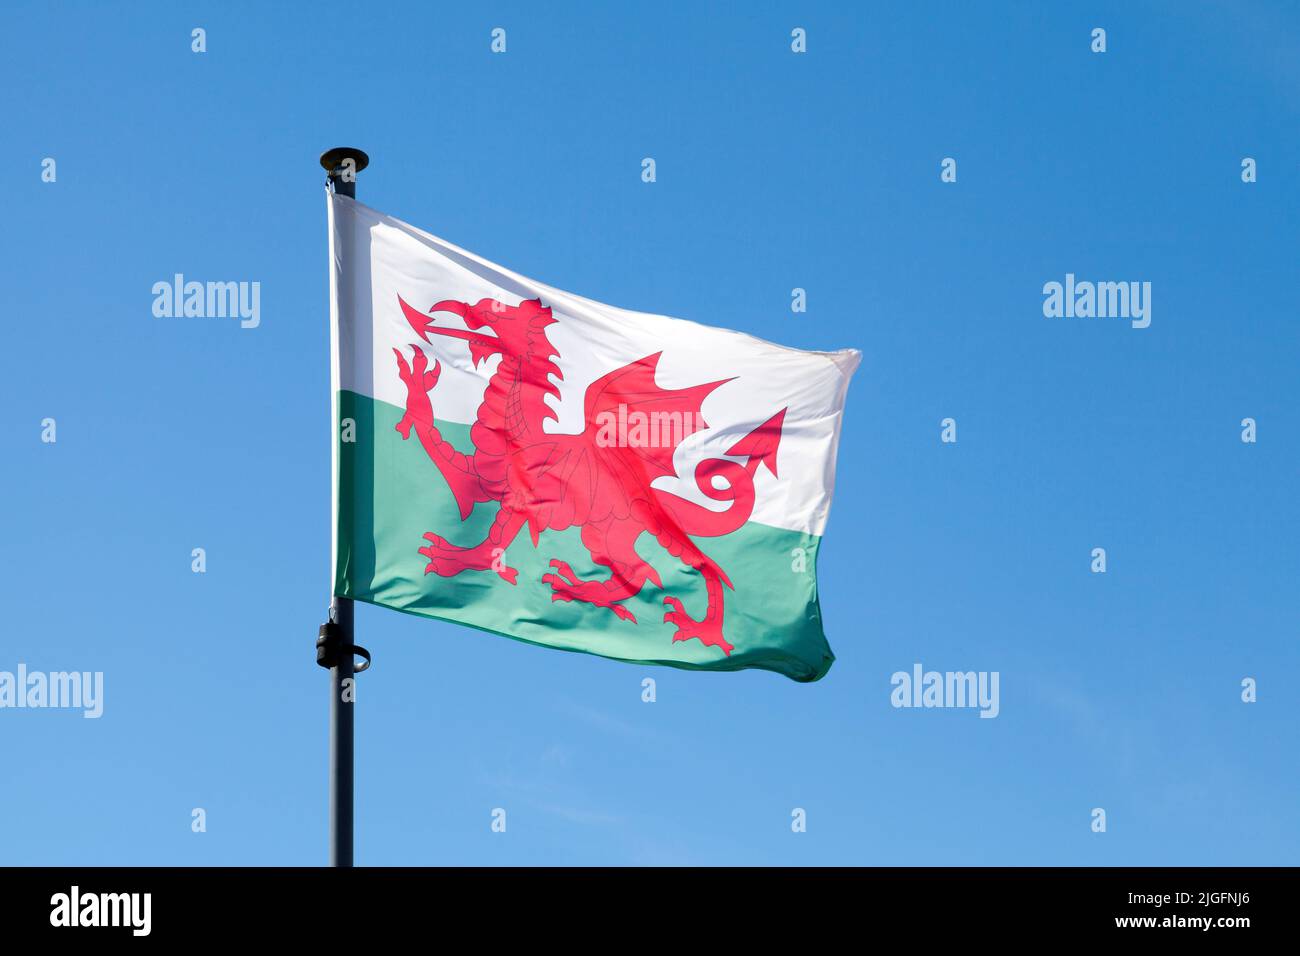 Flag of Wales waving atop of its pole against a blue sky. Stock Photo